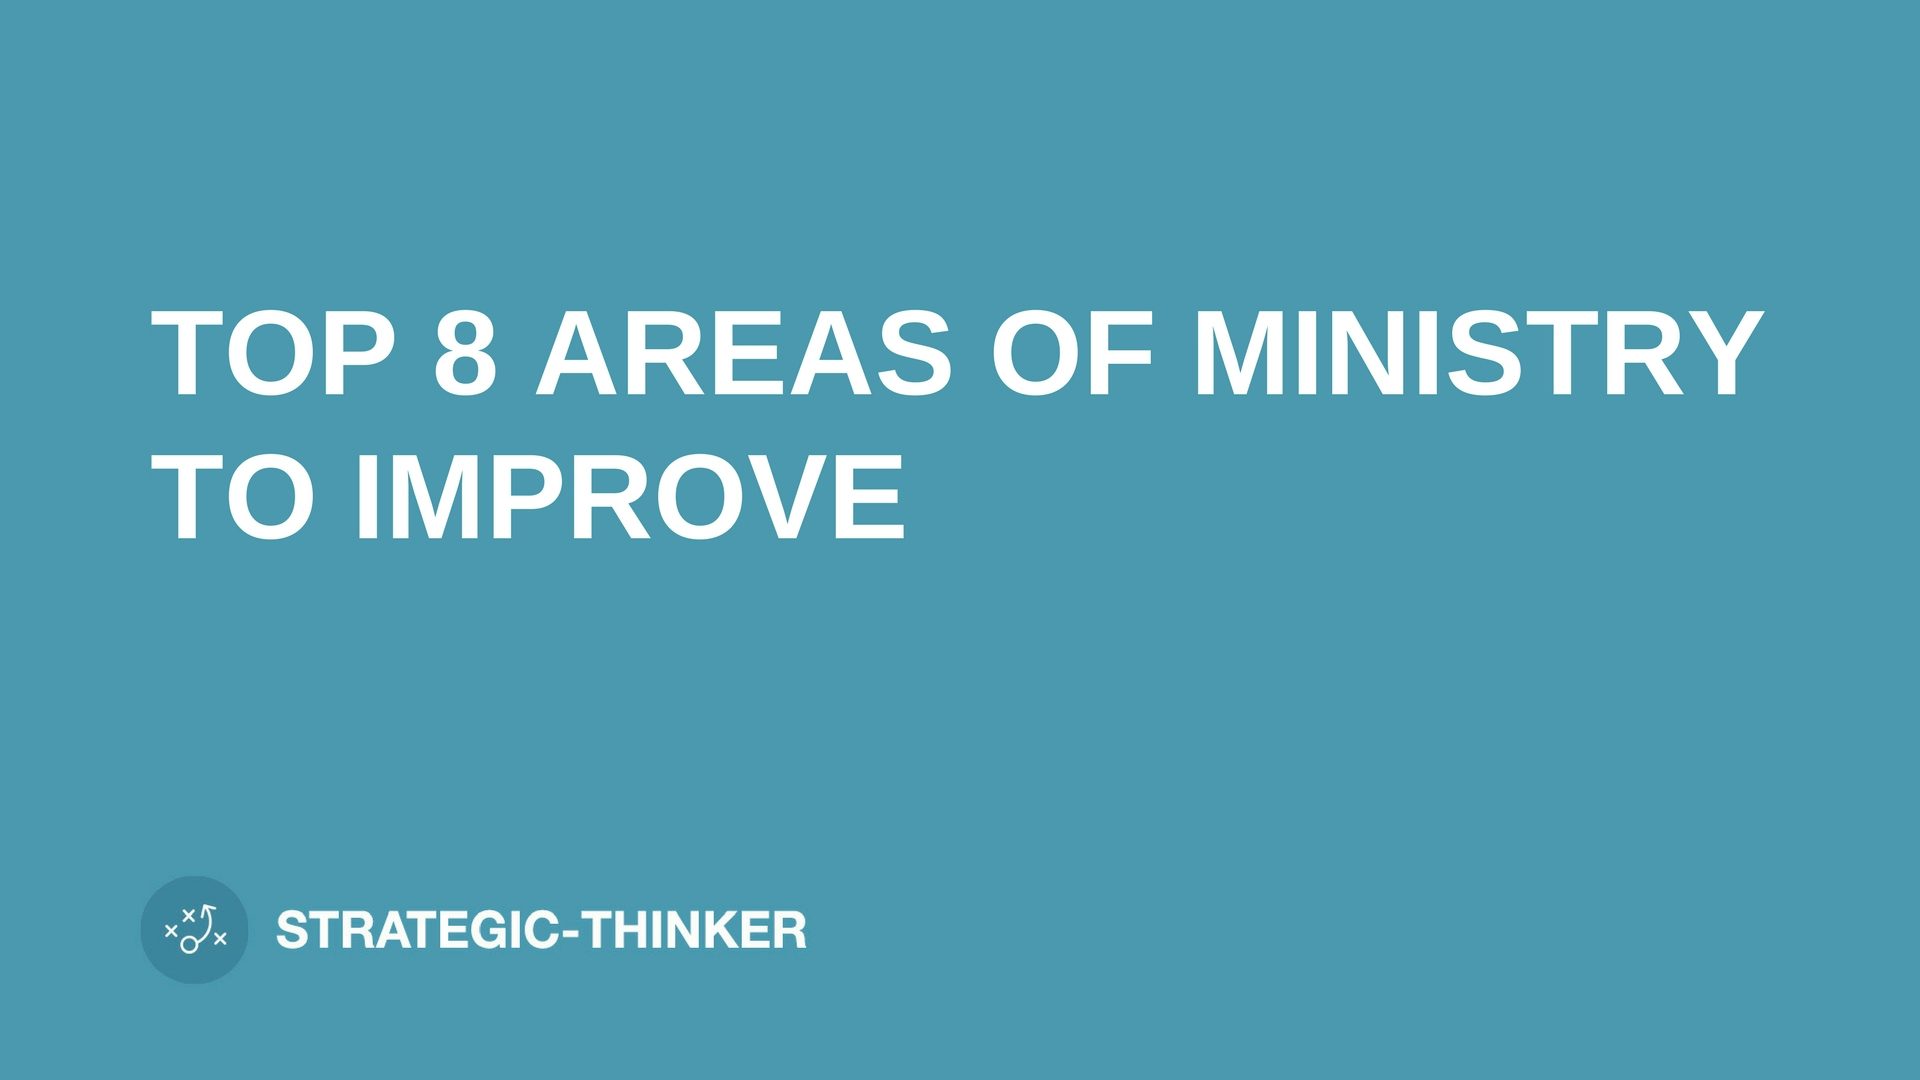 text "top 8 areas of ministry to improve" on blue background leaders.church